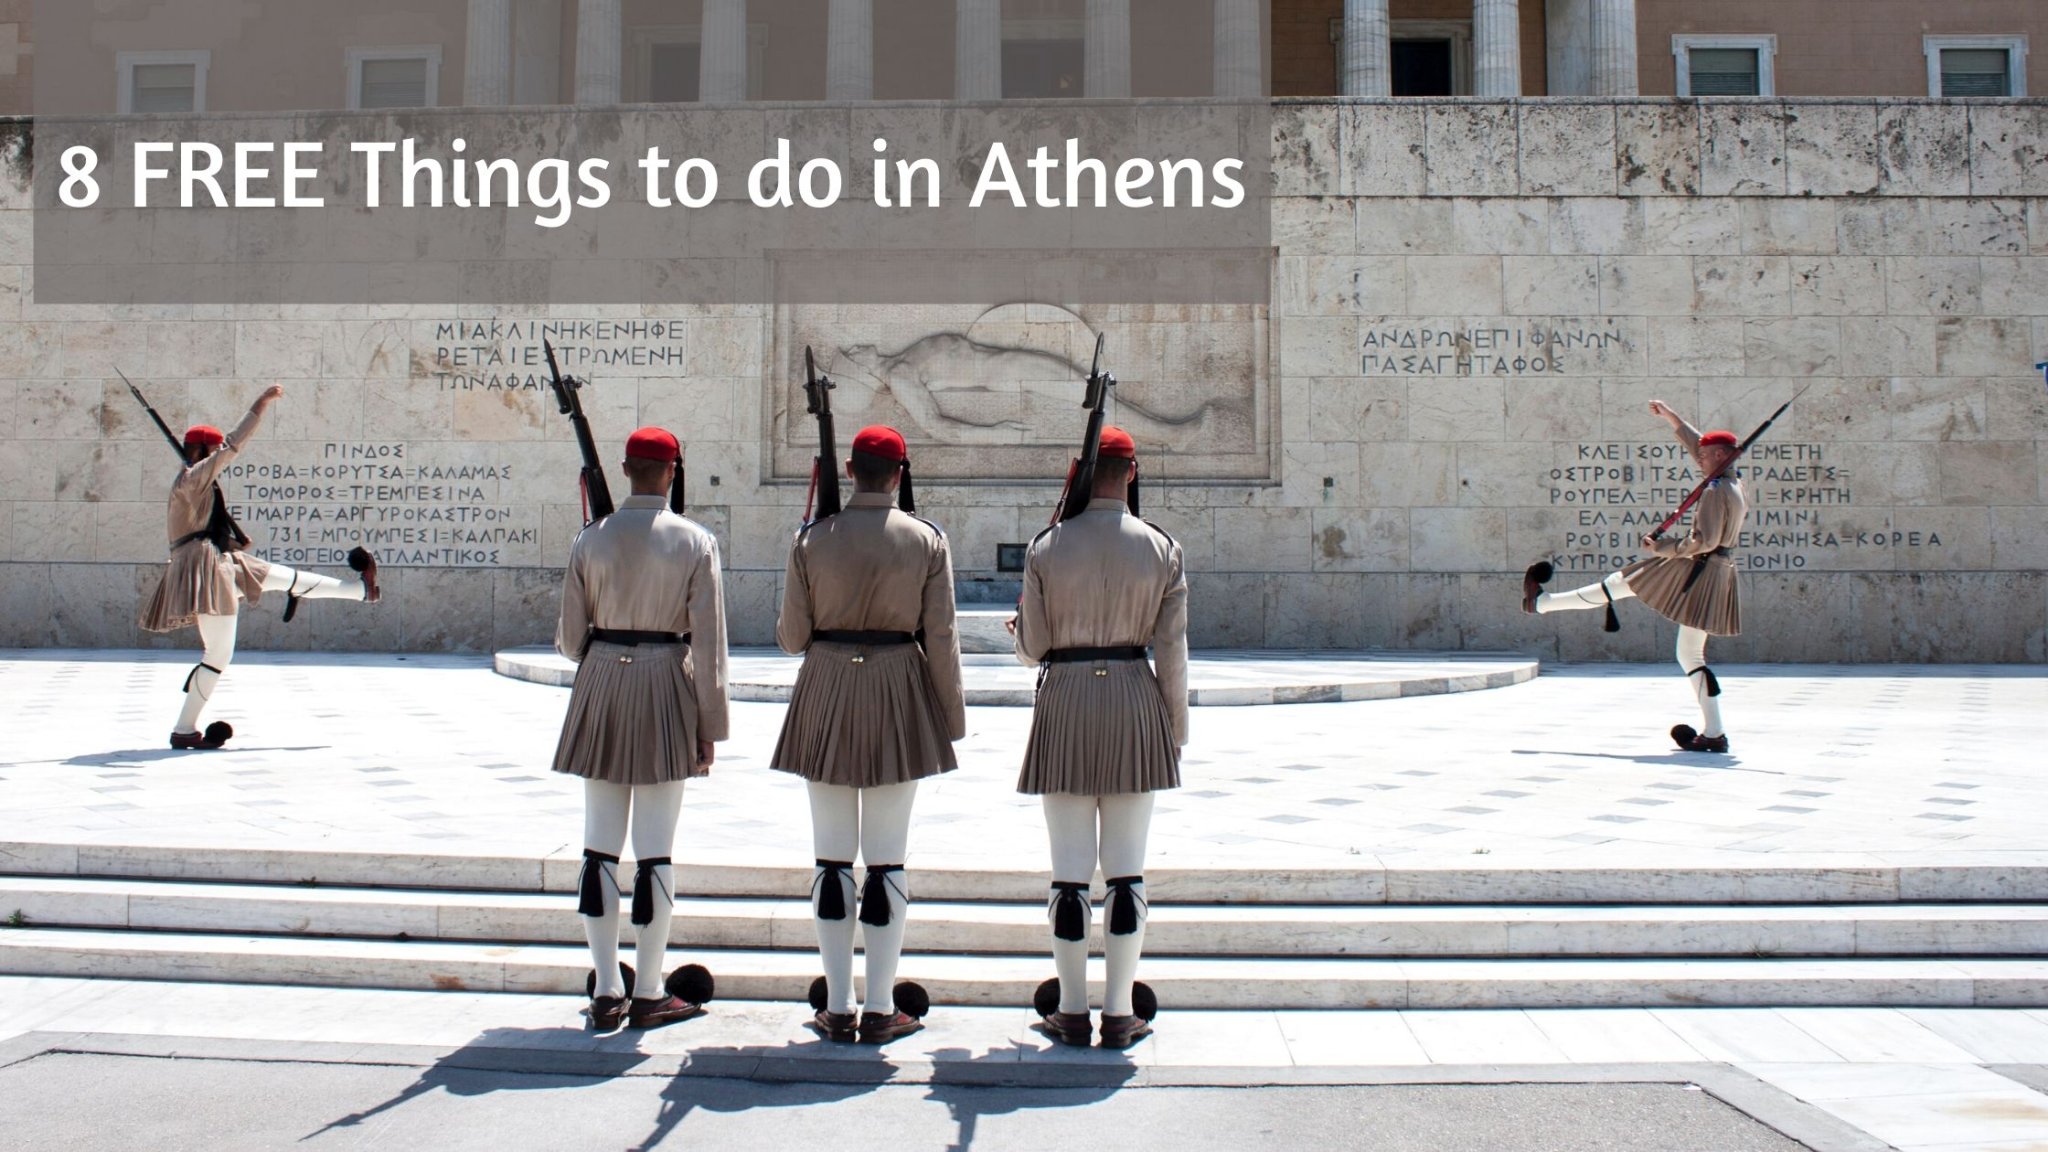 8 FREE things to do in Athens | Looknwalk